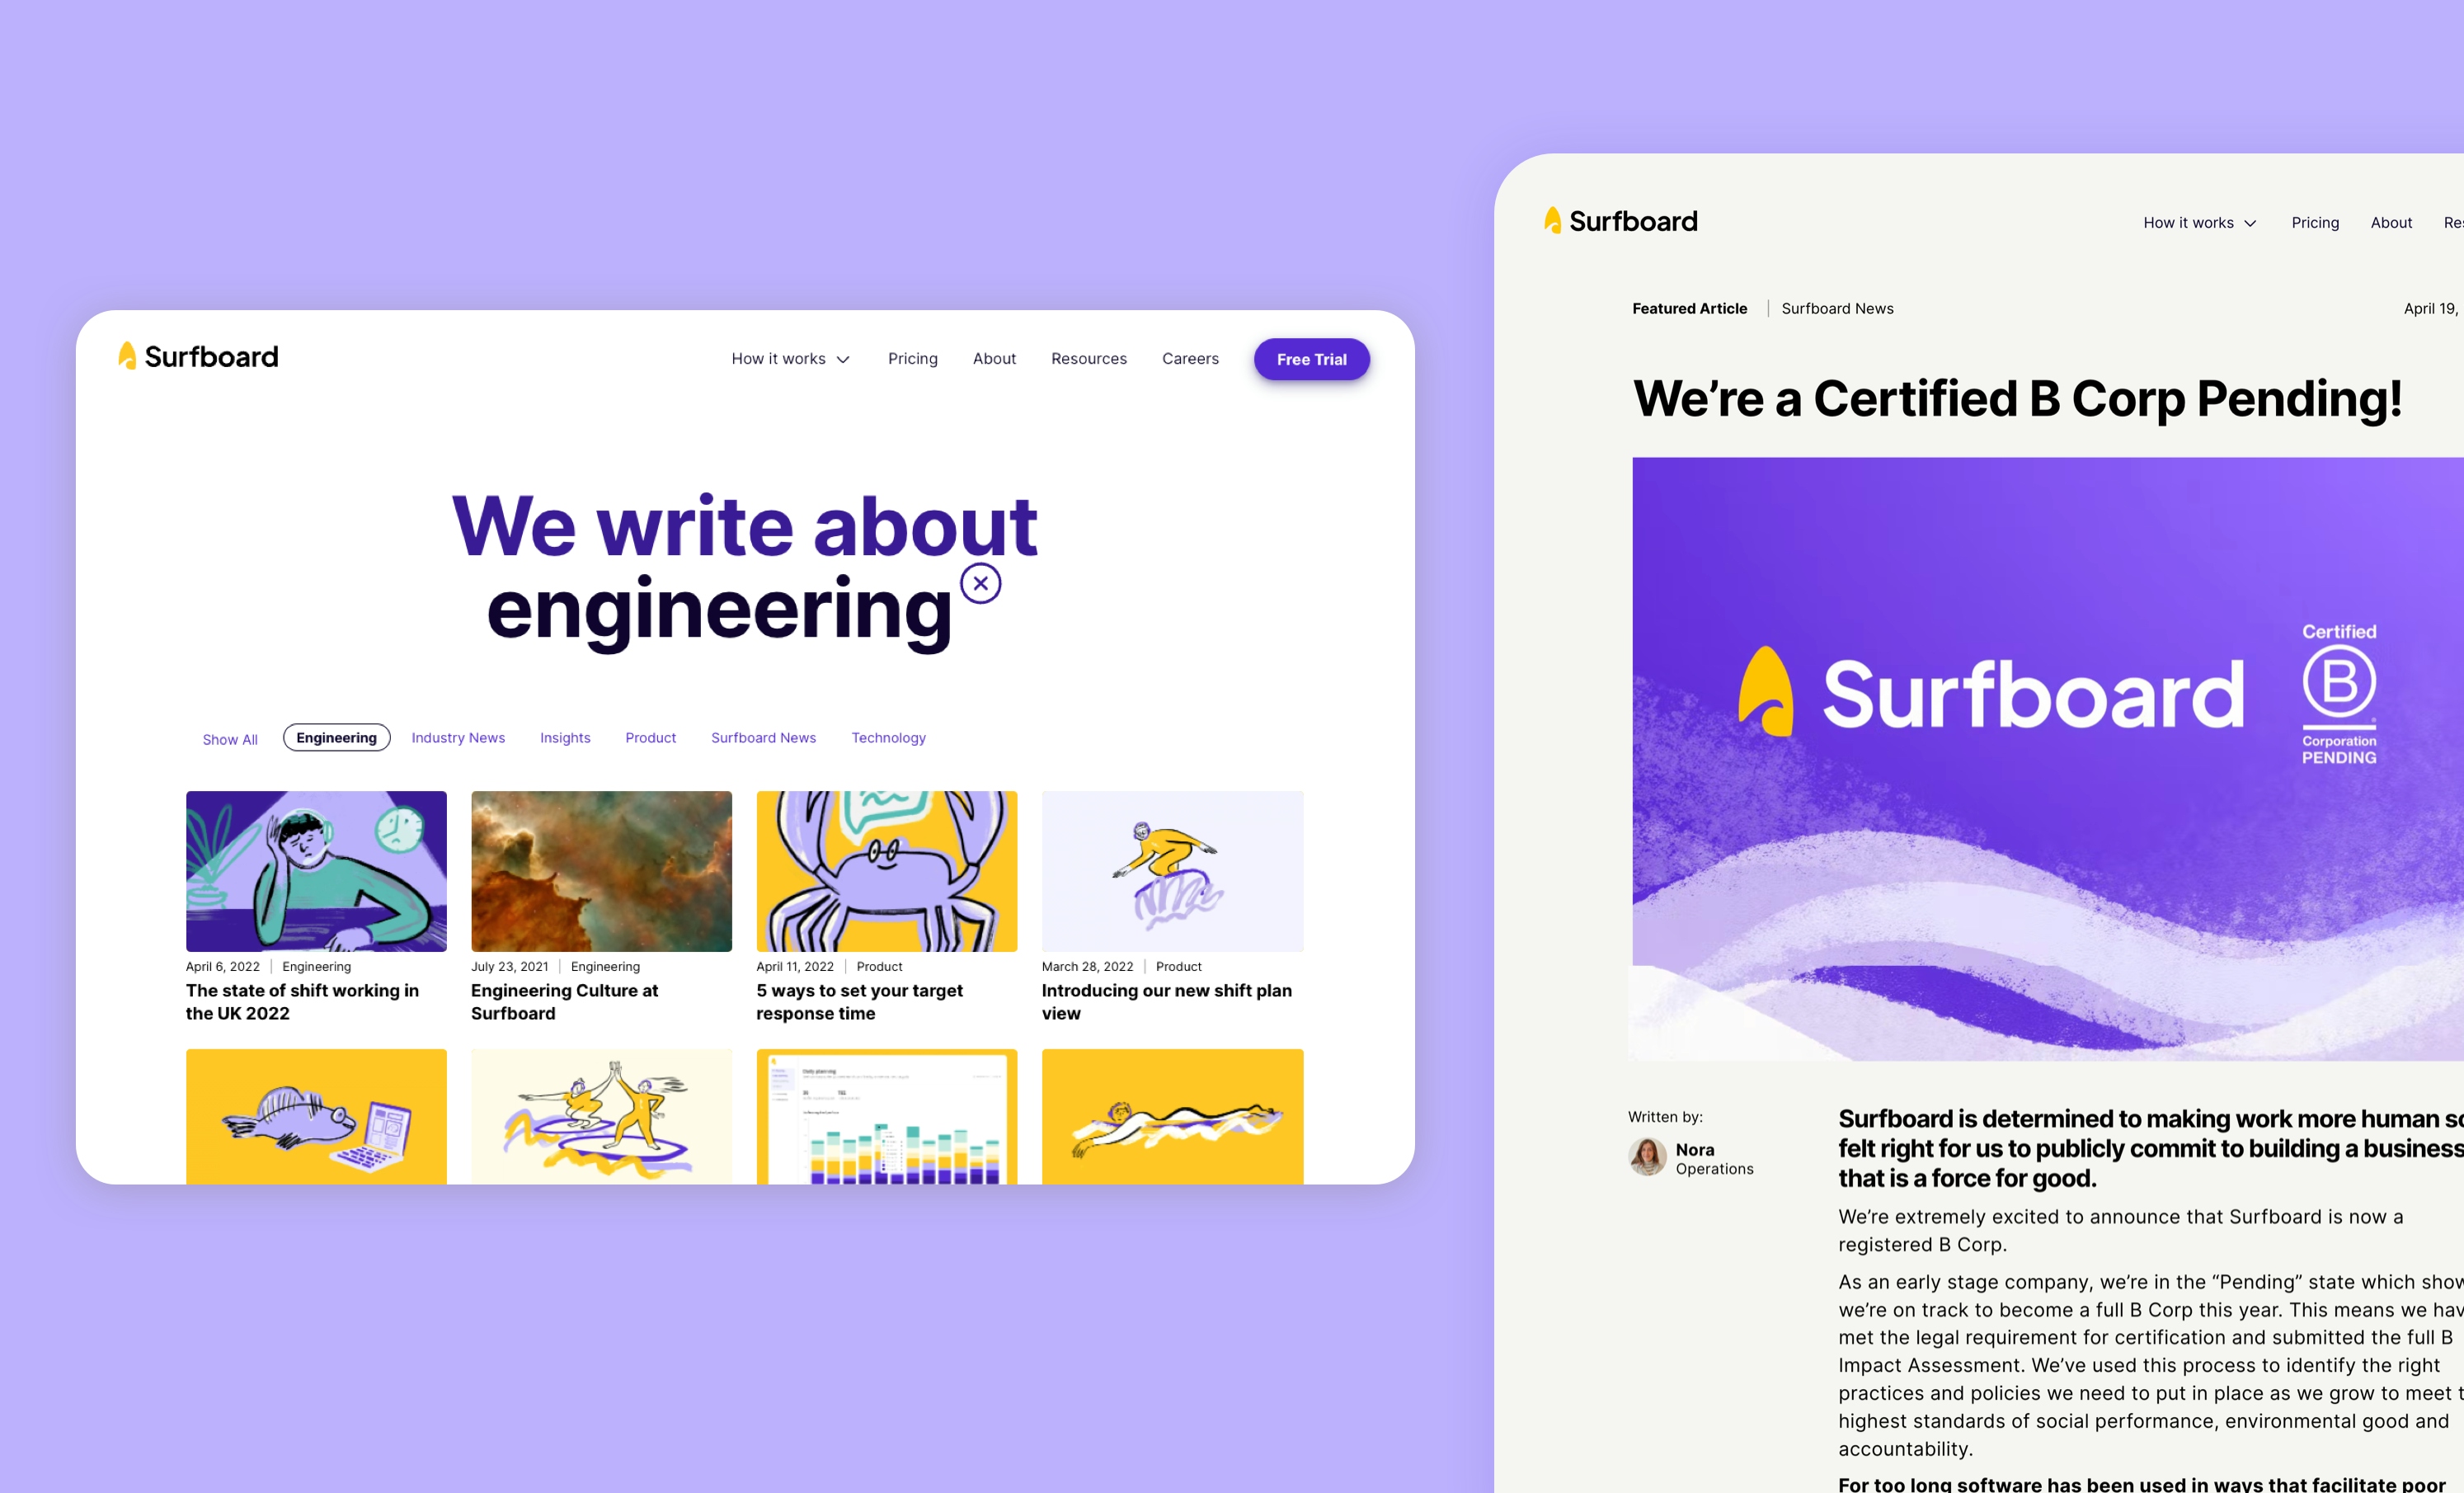 A digital screenshot of a webpagestating “We write about engineering” and links to articles. This is on a lilac background. A second portrait screenshot is of an article about “We’re Certified B Corp Pending!”